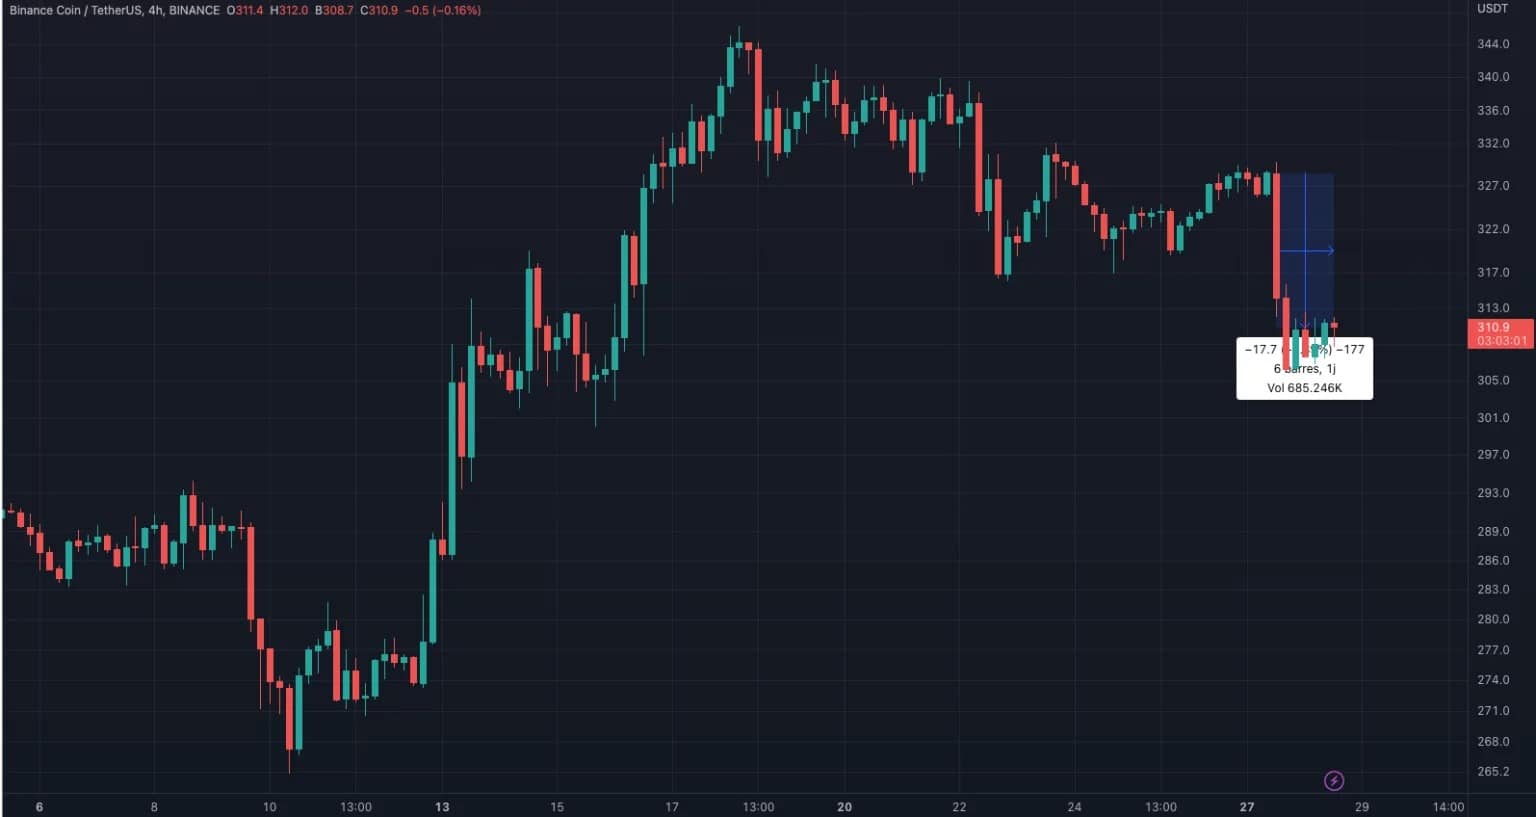 The fall of BNB/USDT over the last 24 hours